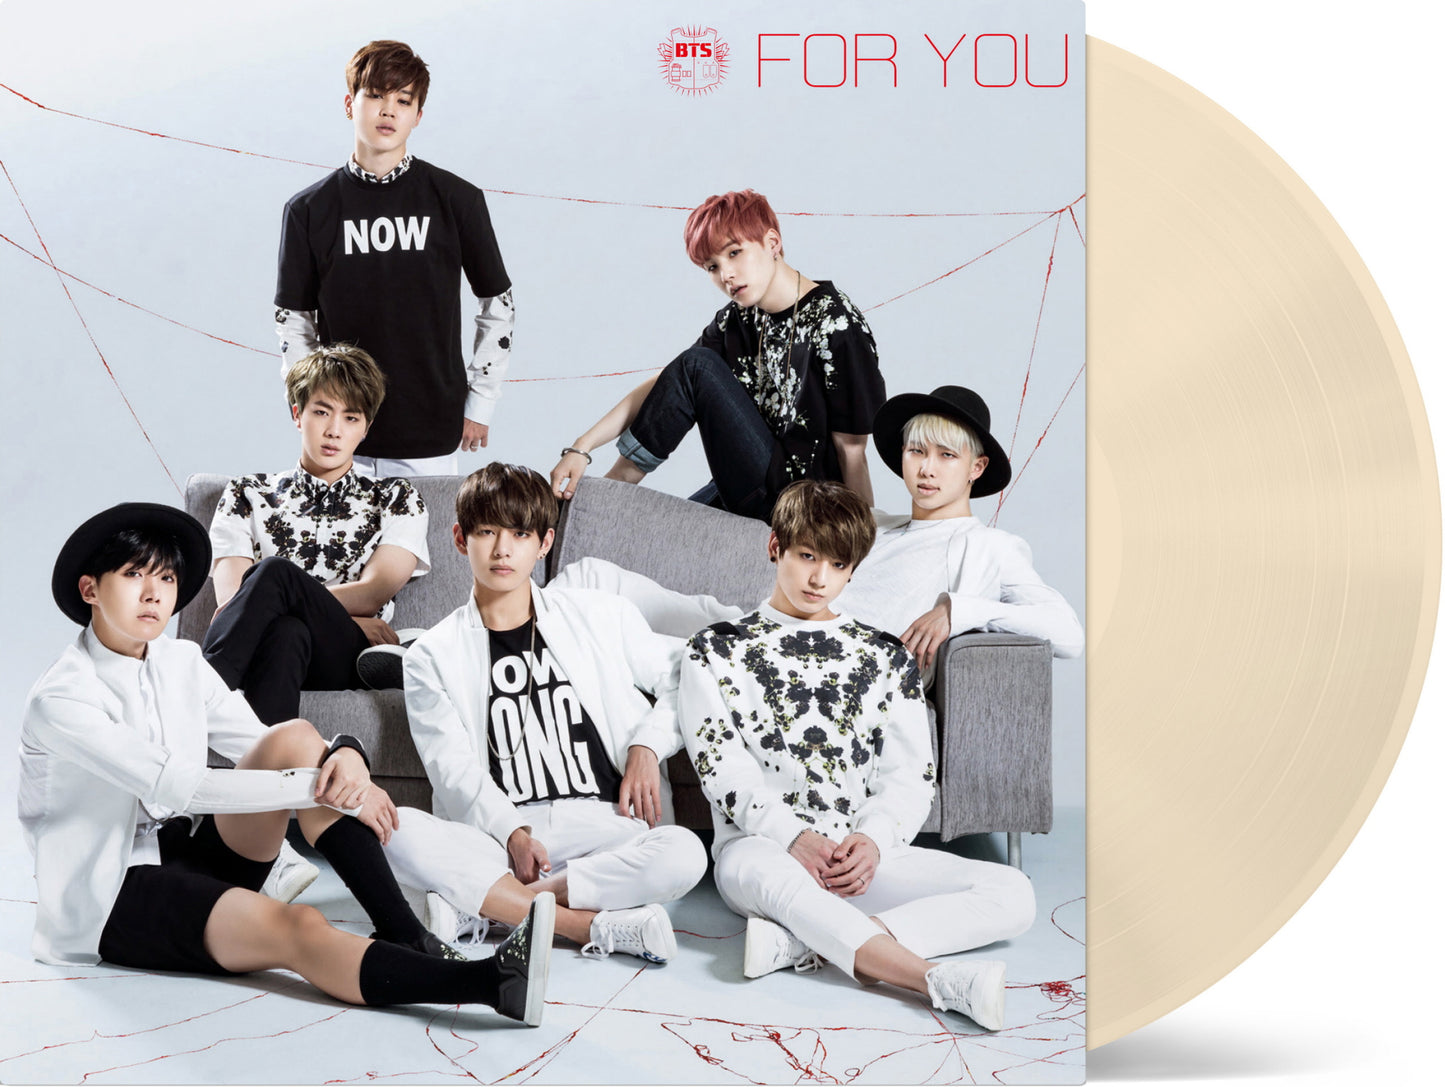 BTS - 'FOR YOU' (Limited Edition) VINYL LP